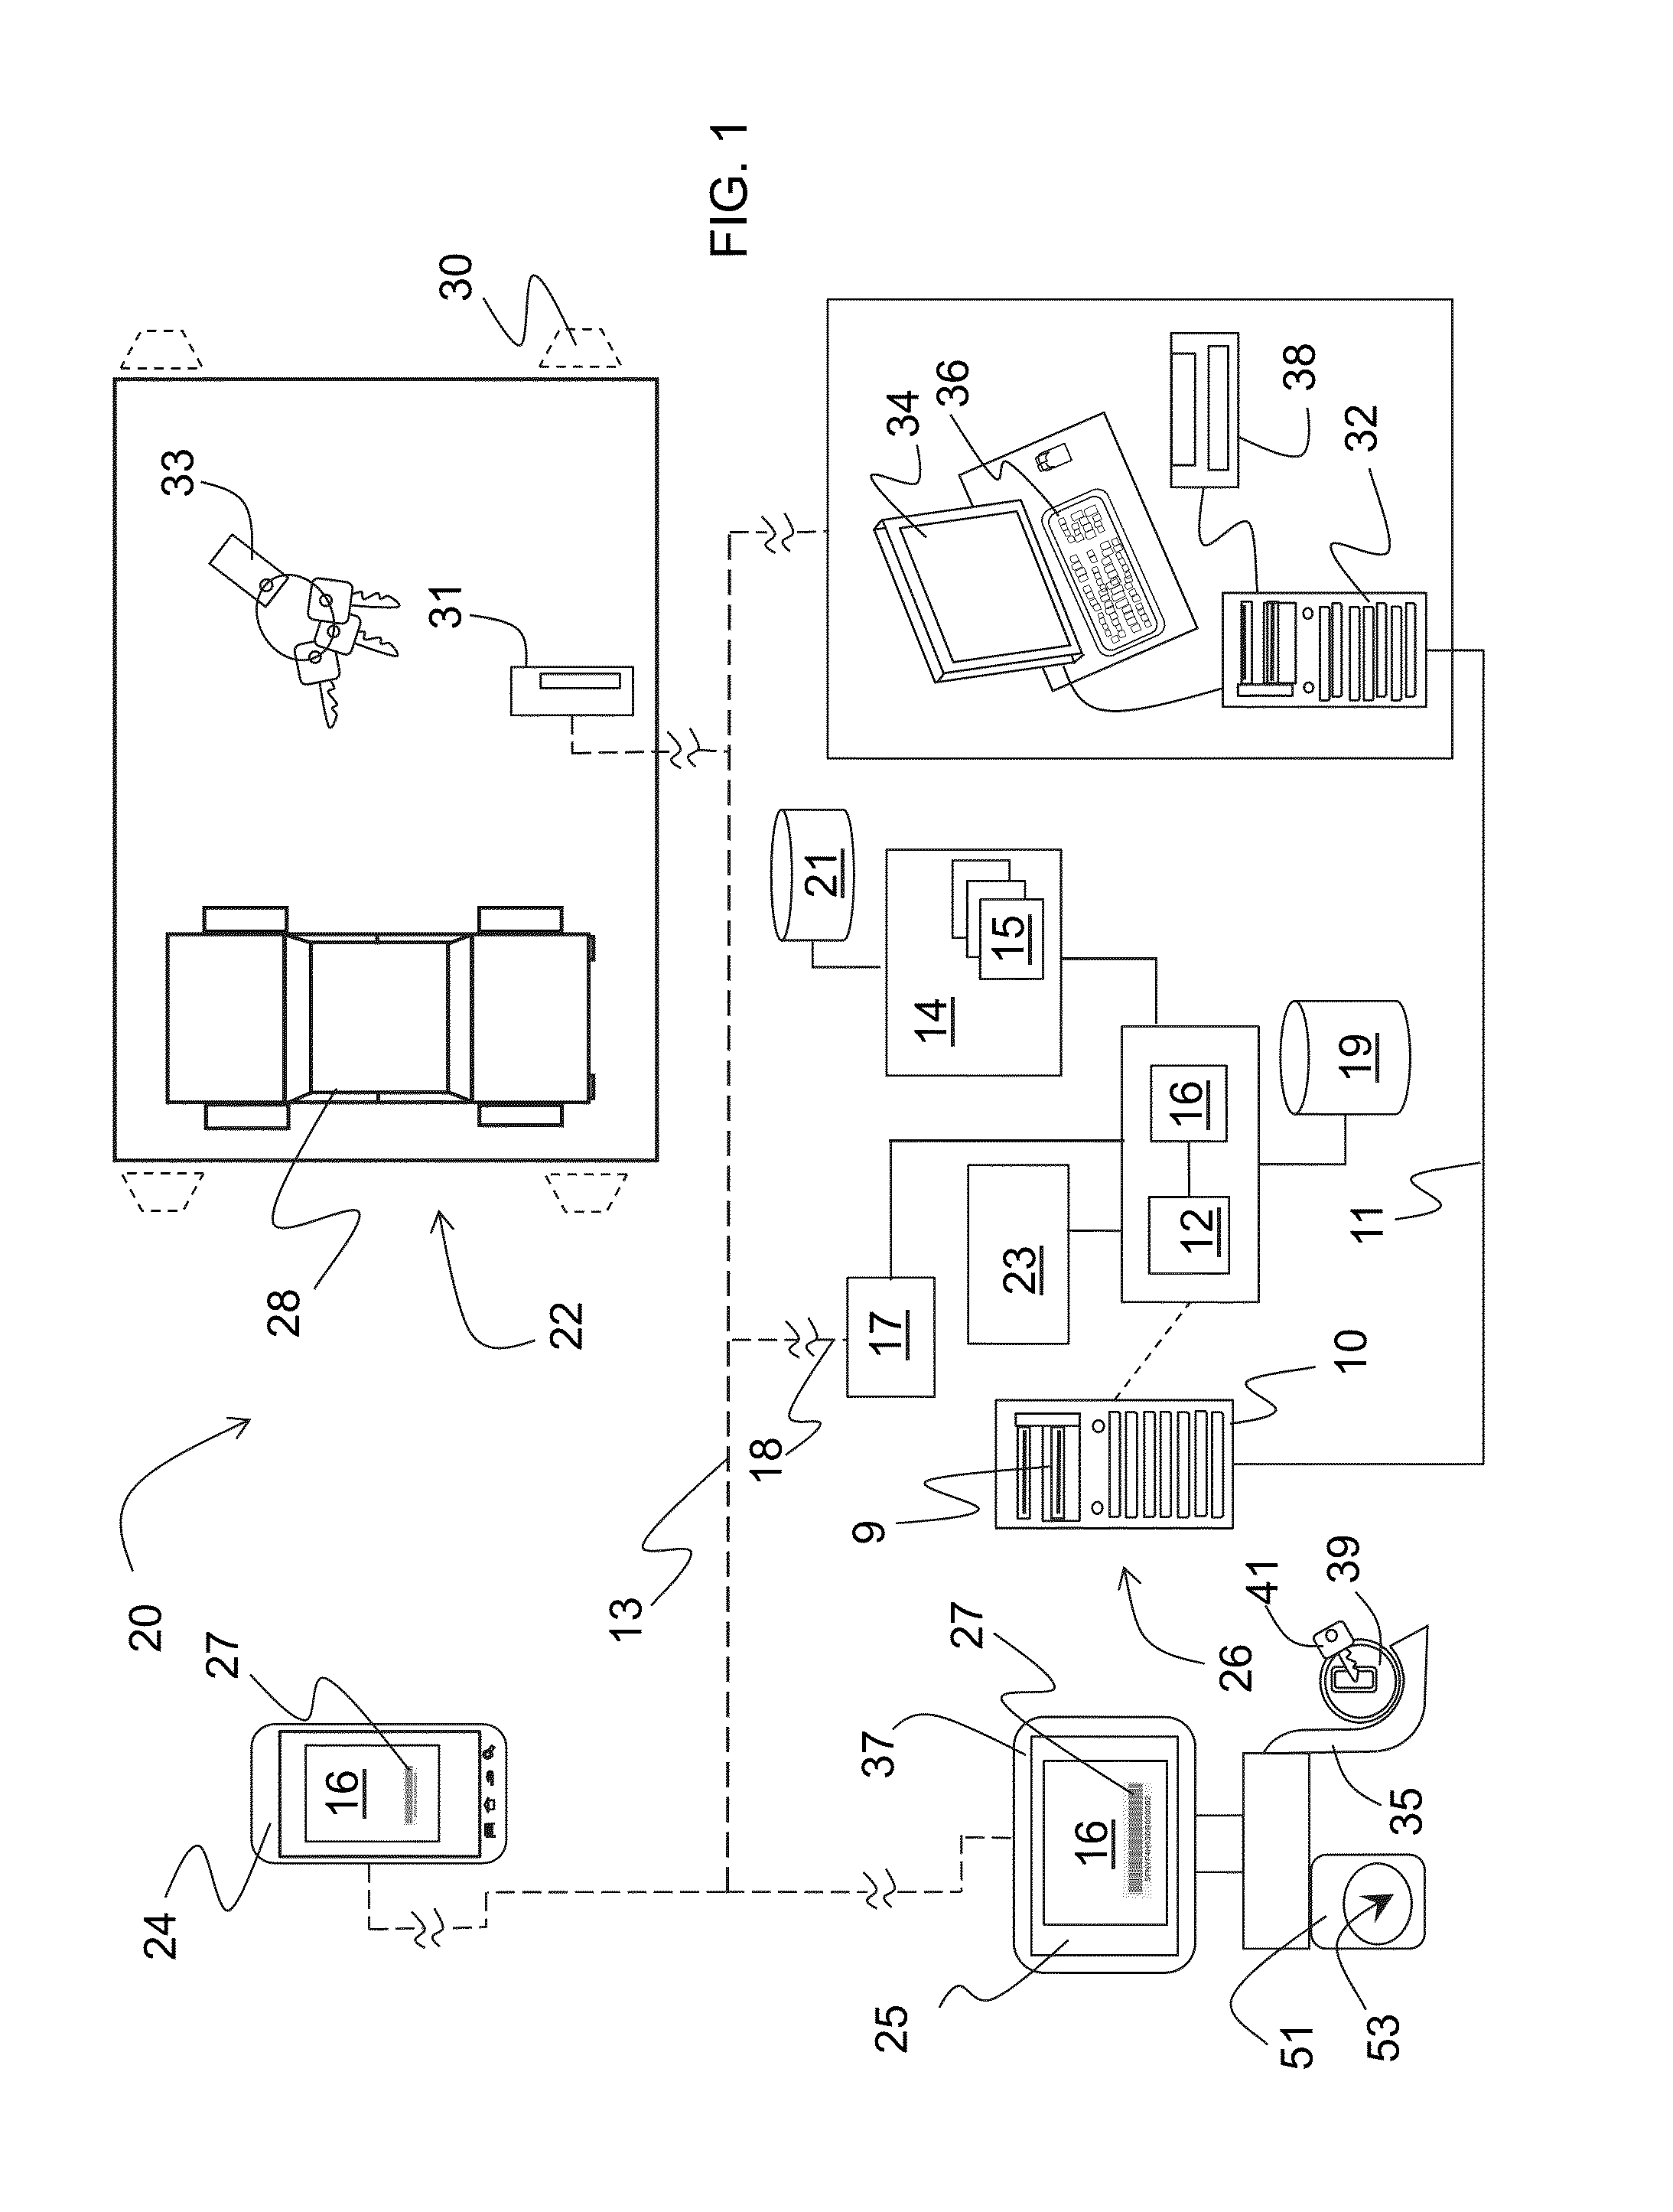 Software application for the automated drop-off and pick-up of a service item at a service facility